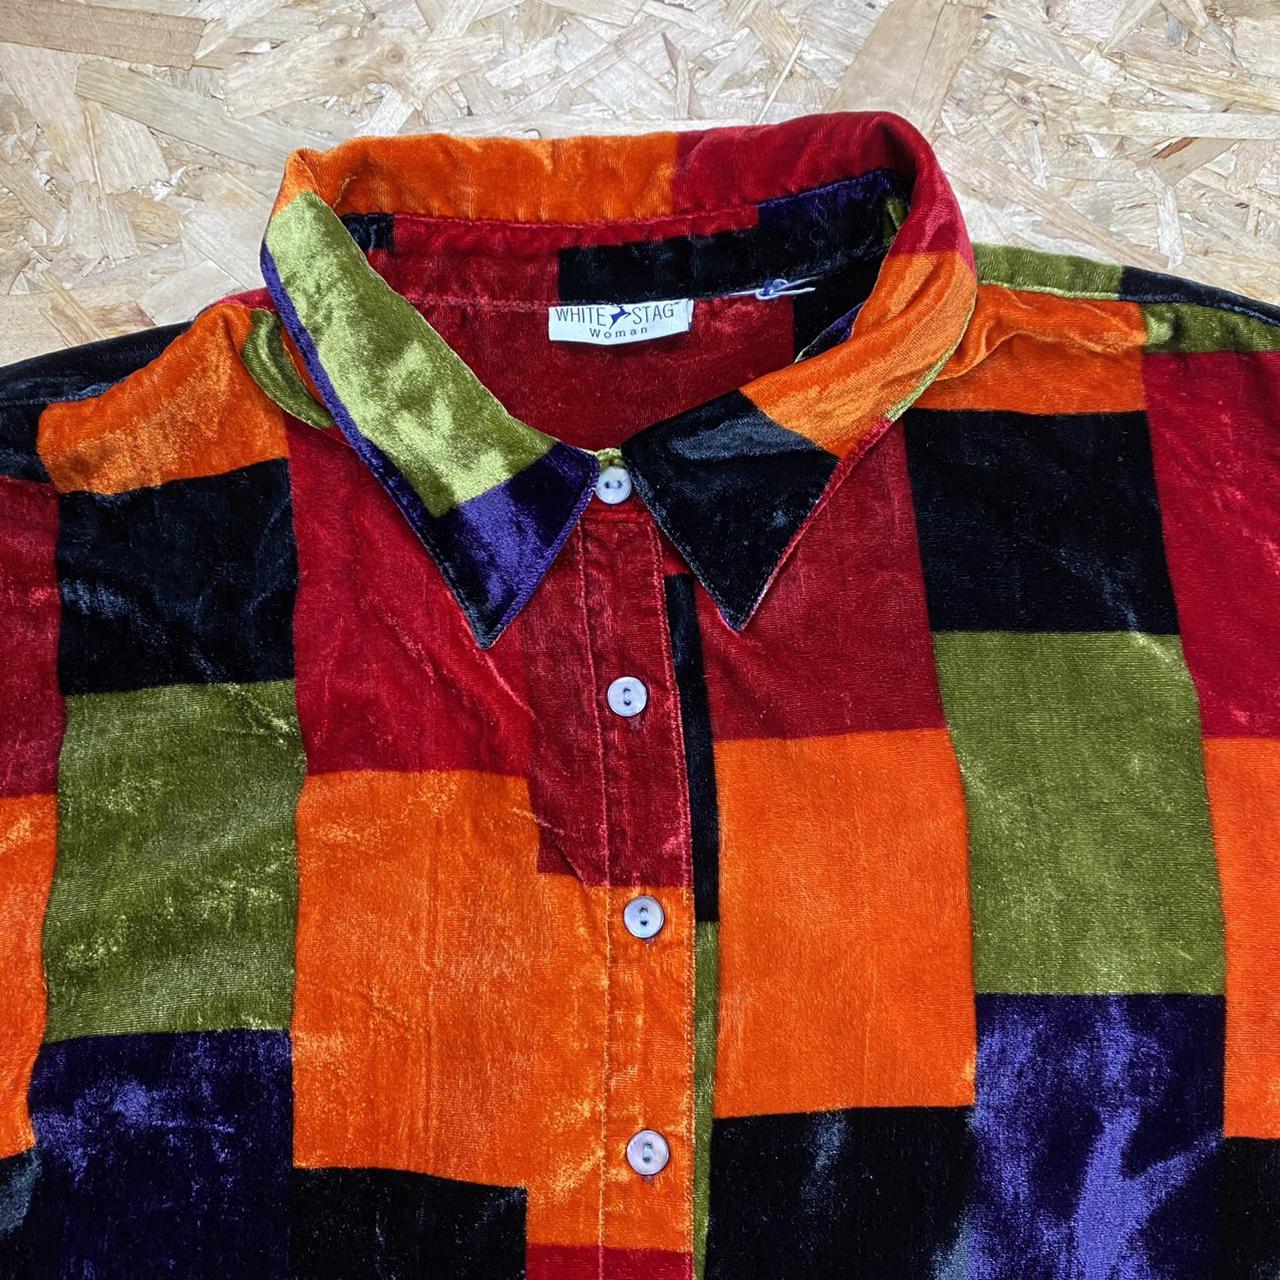 Product Image 2 - Crazy abstract velvet shirt 

Super